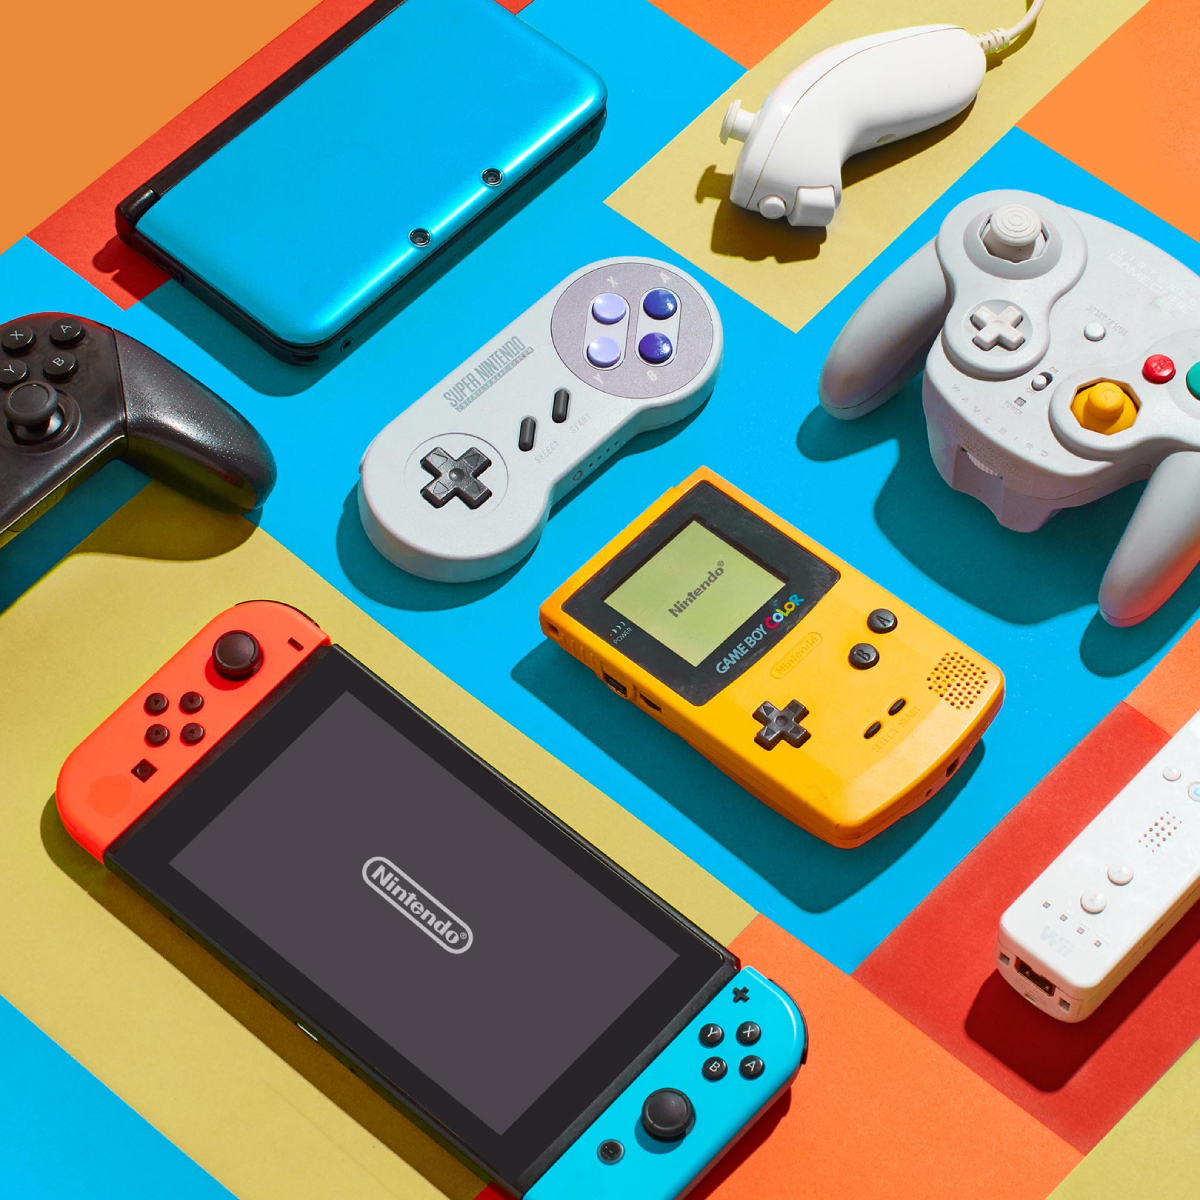 A color photo by Brandon Hill of a colorful still life arrangement of Nintendo products.